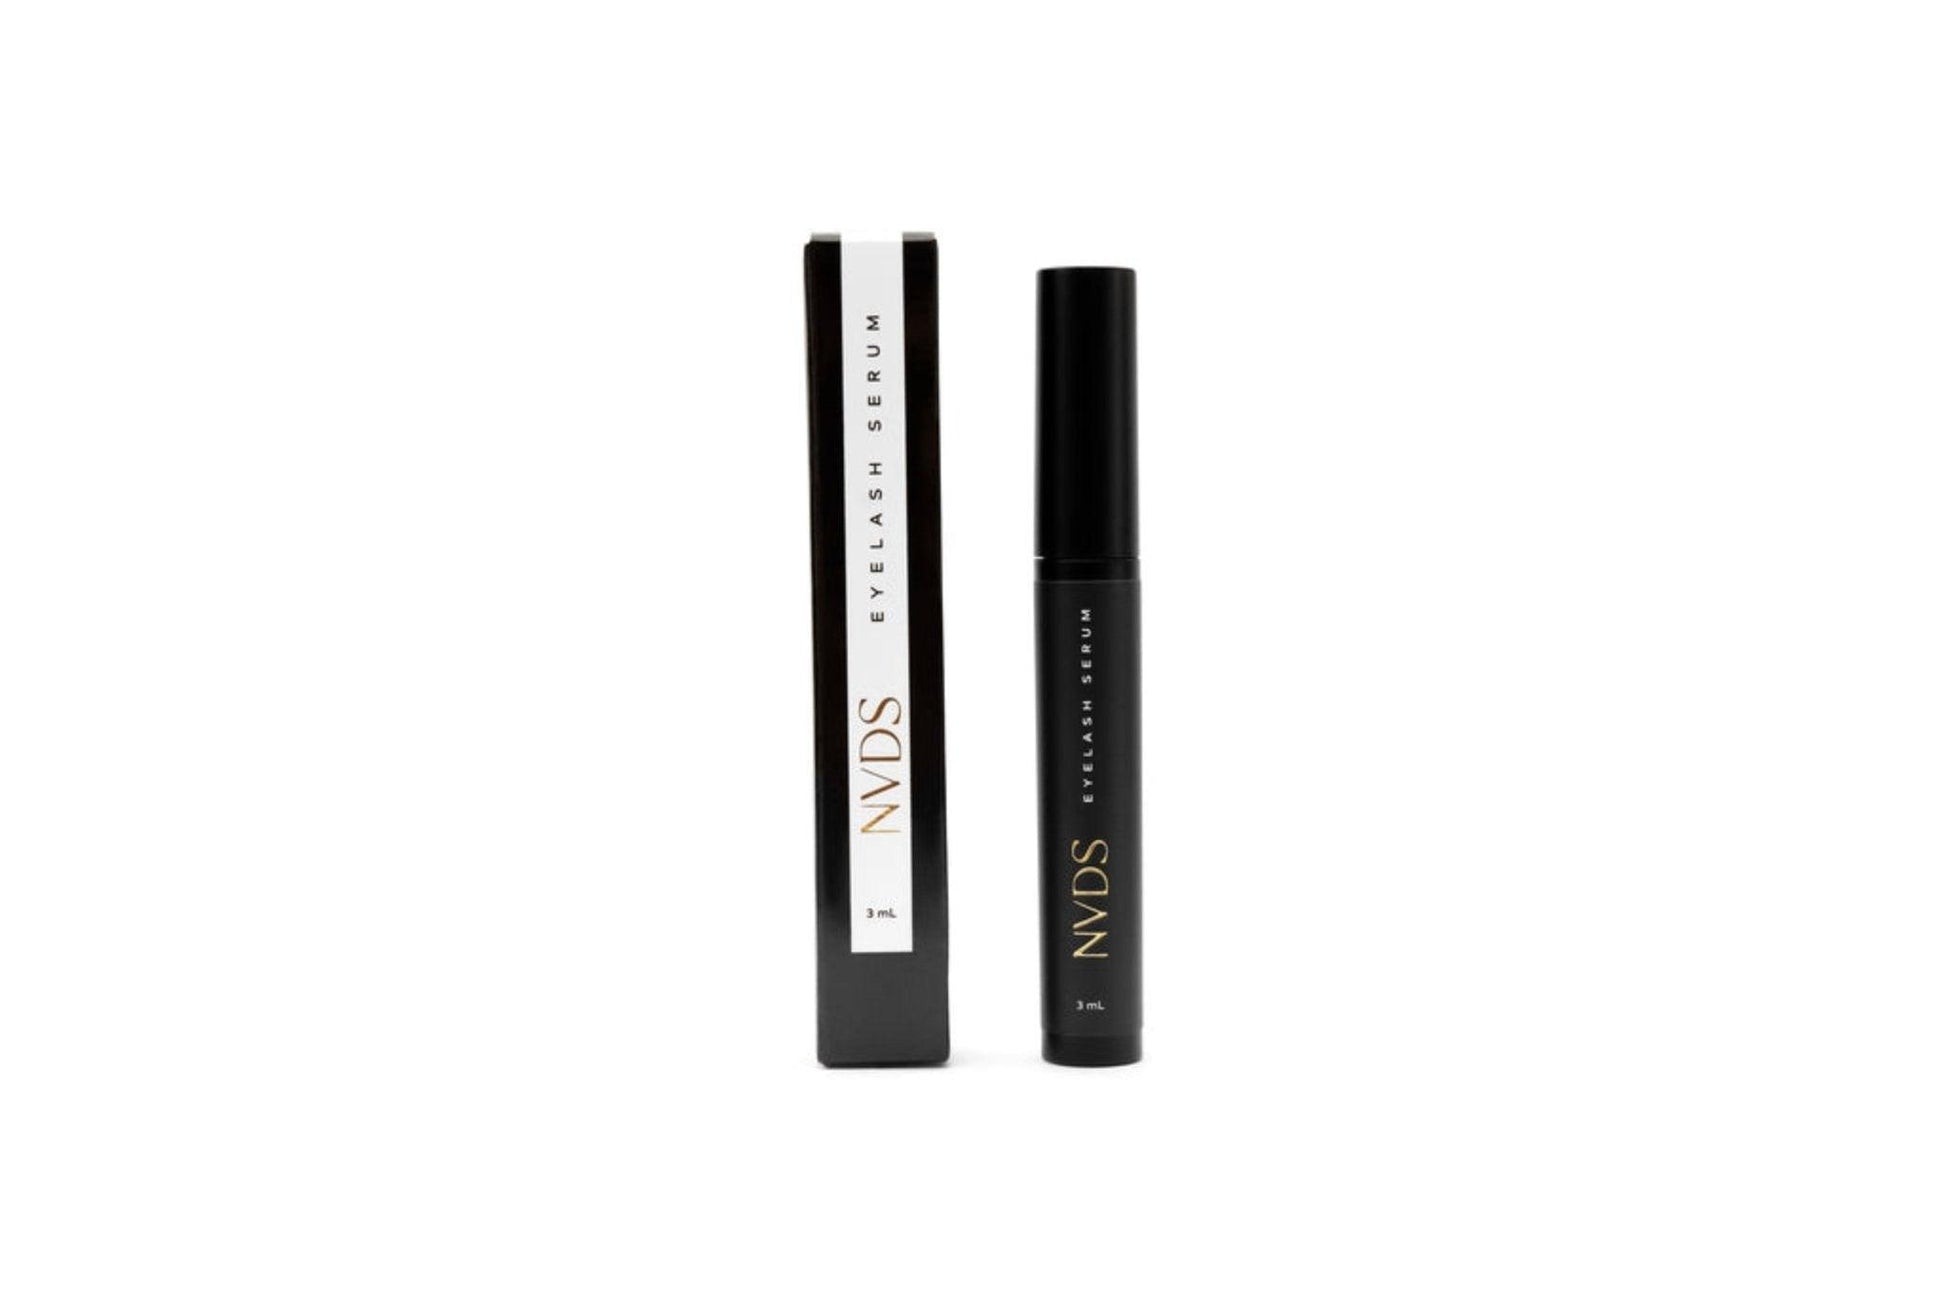 Bottle of NVDS Lash Growth Serum with a sleek design and a black cap.